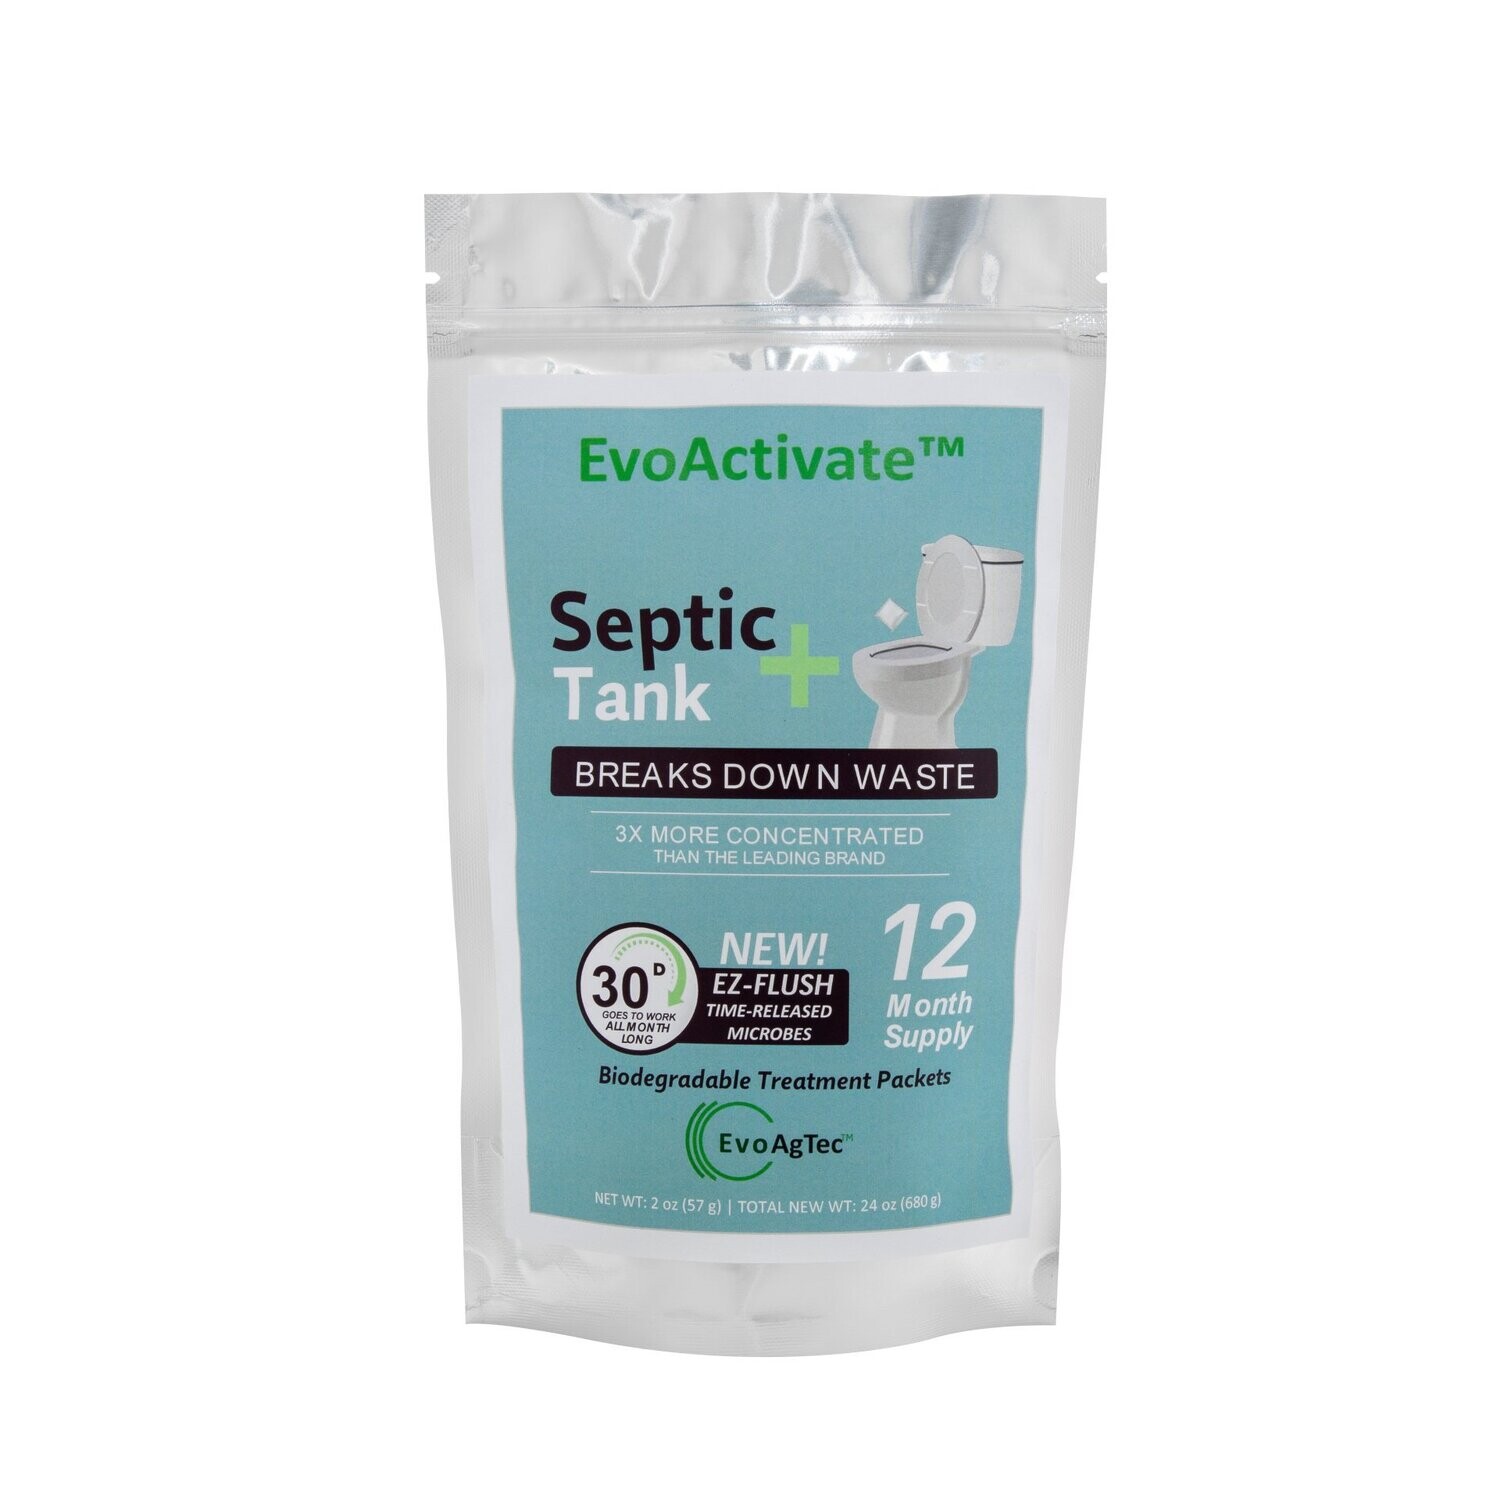 EvoActivate™ for Septic Tanks 12 months supply